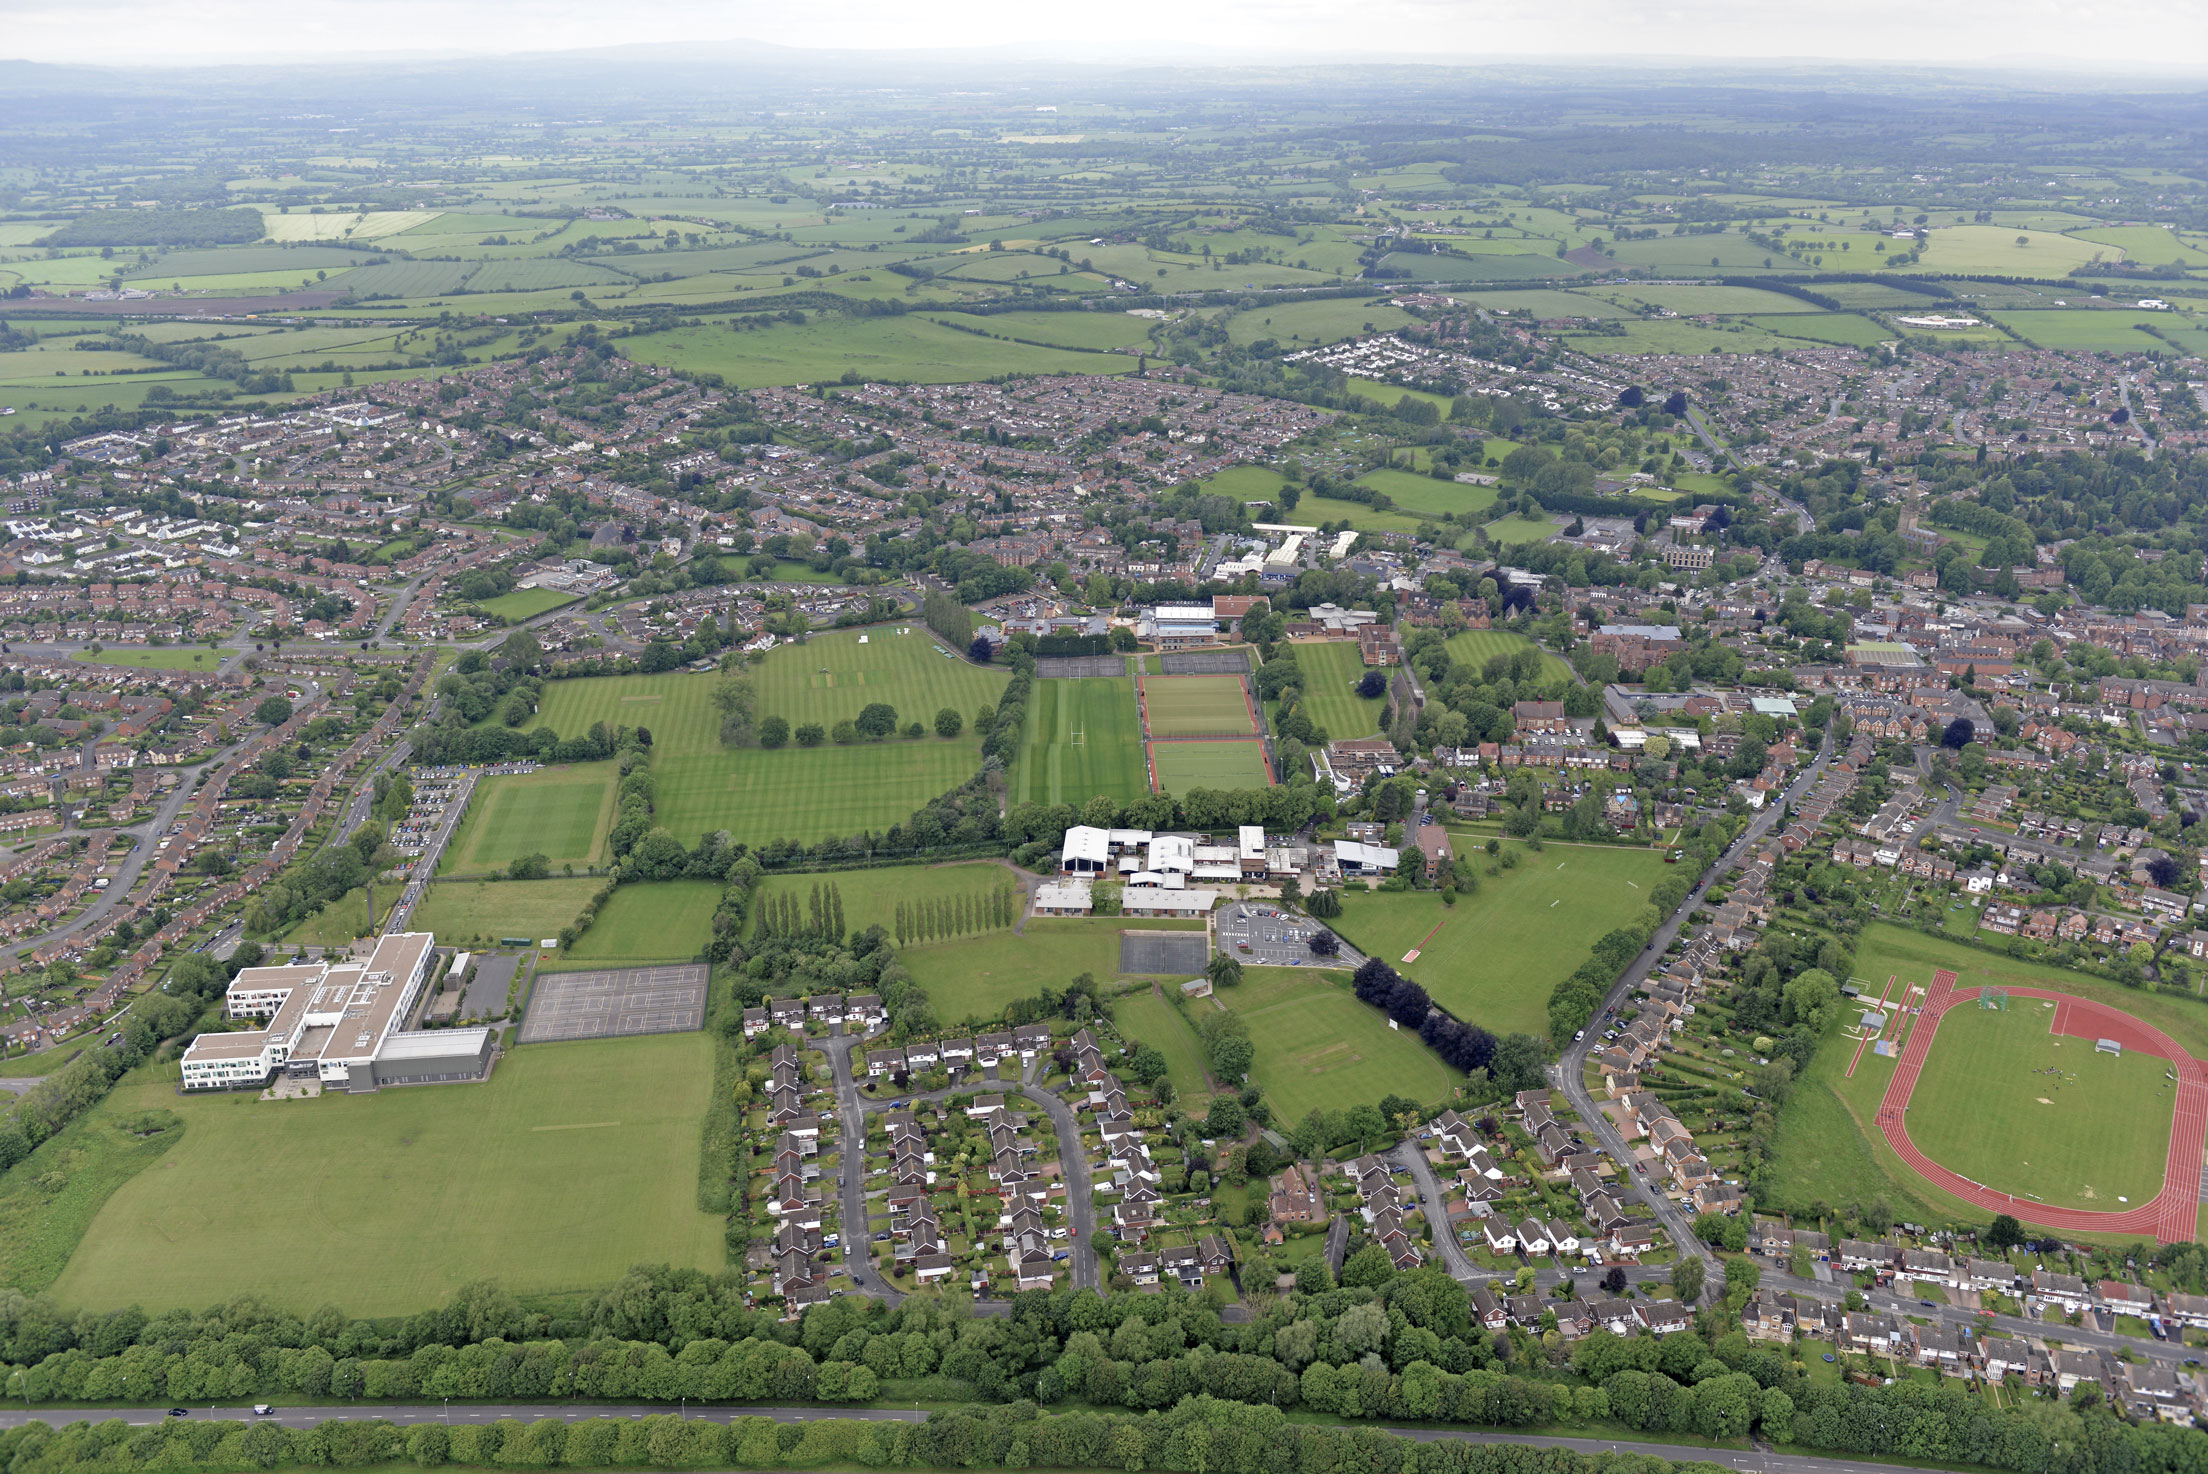 An aerial view of the School site